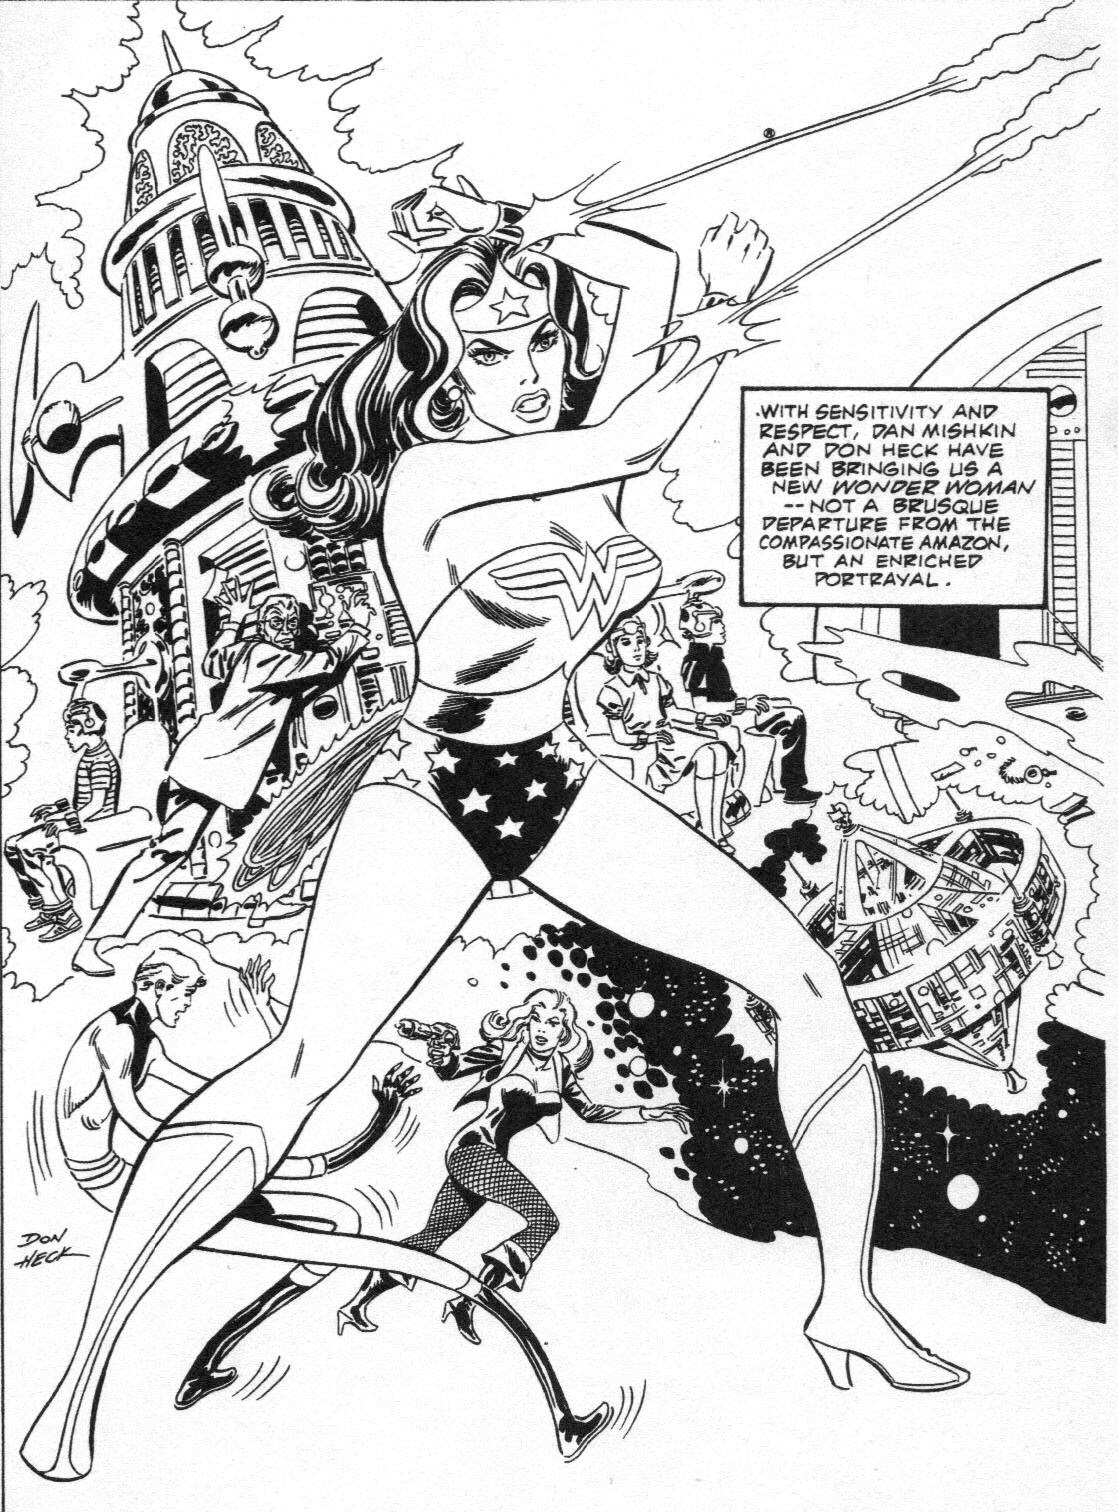 Wonder Woman by Don Heck, published in a DC Comics “Sampler” back in 1983,reprinted in Alter Ego #13